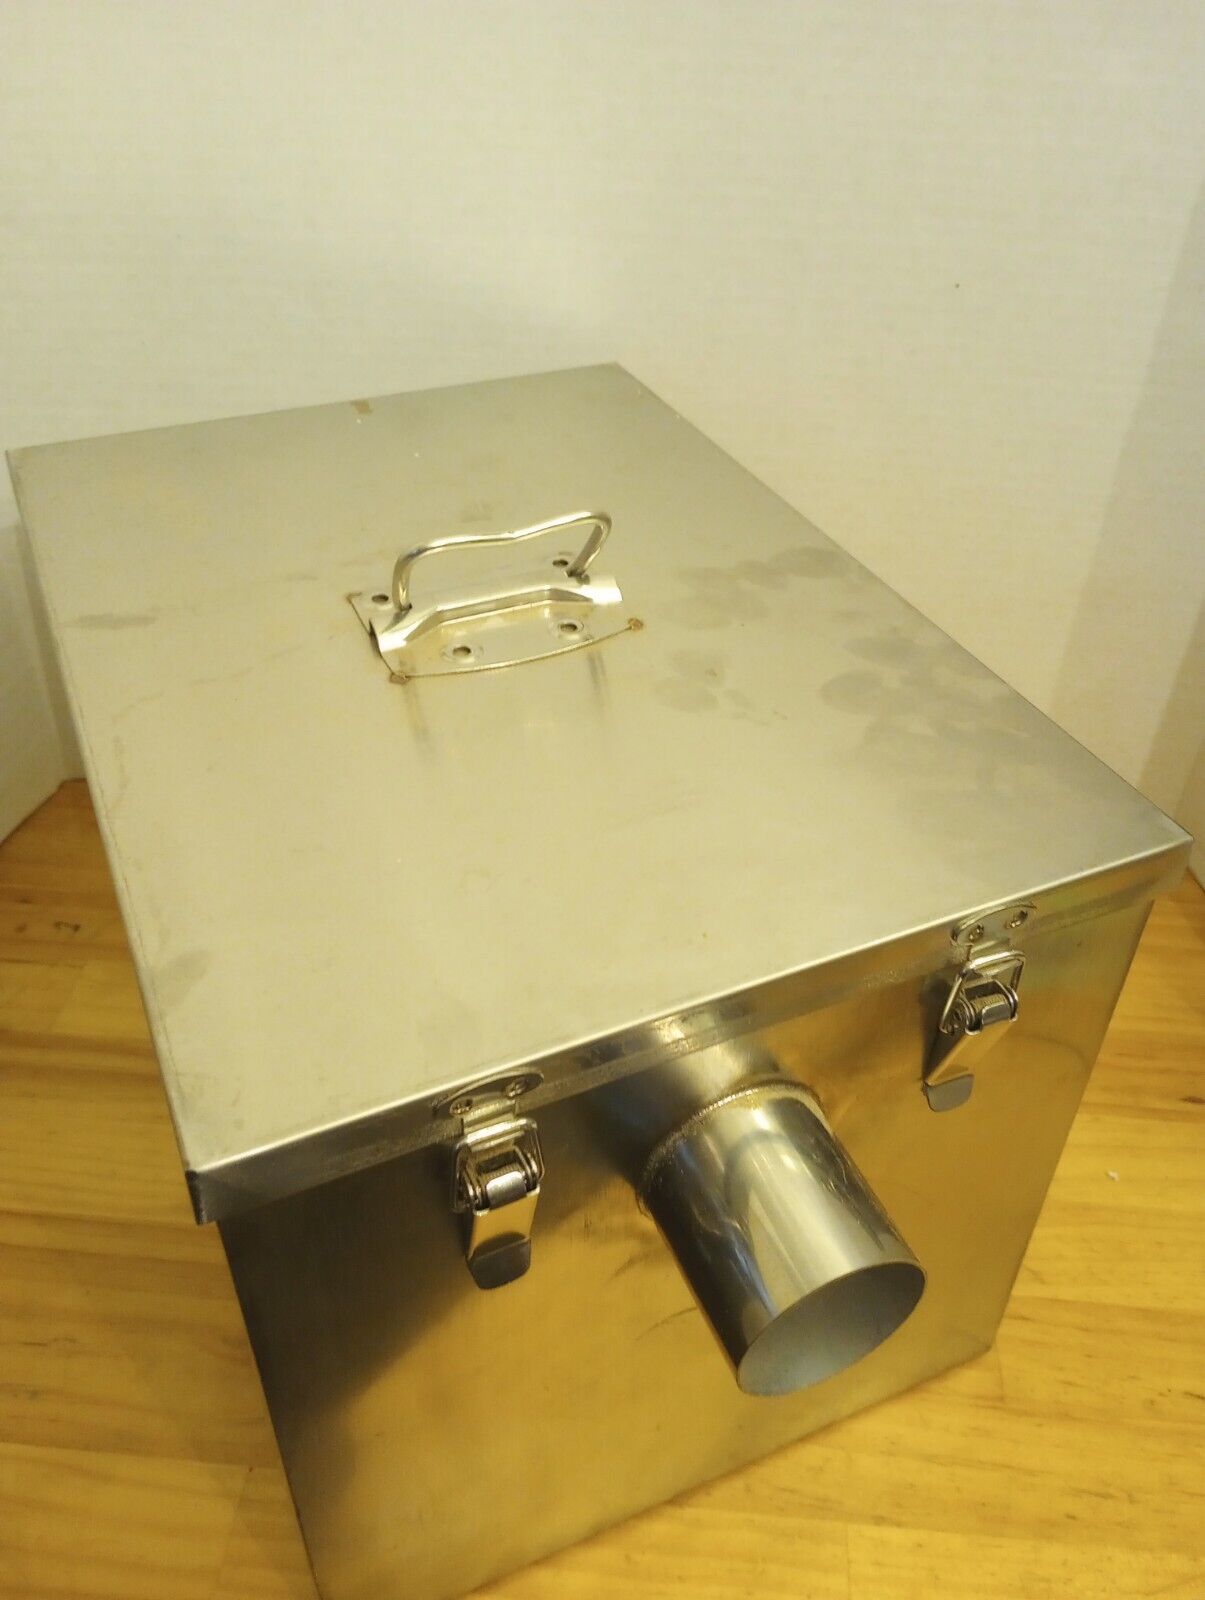 Grease Trap Catering Waste Oil Filter Stainless Steel 14x10x10